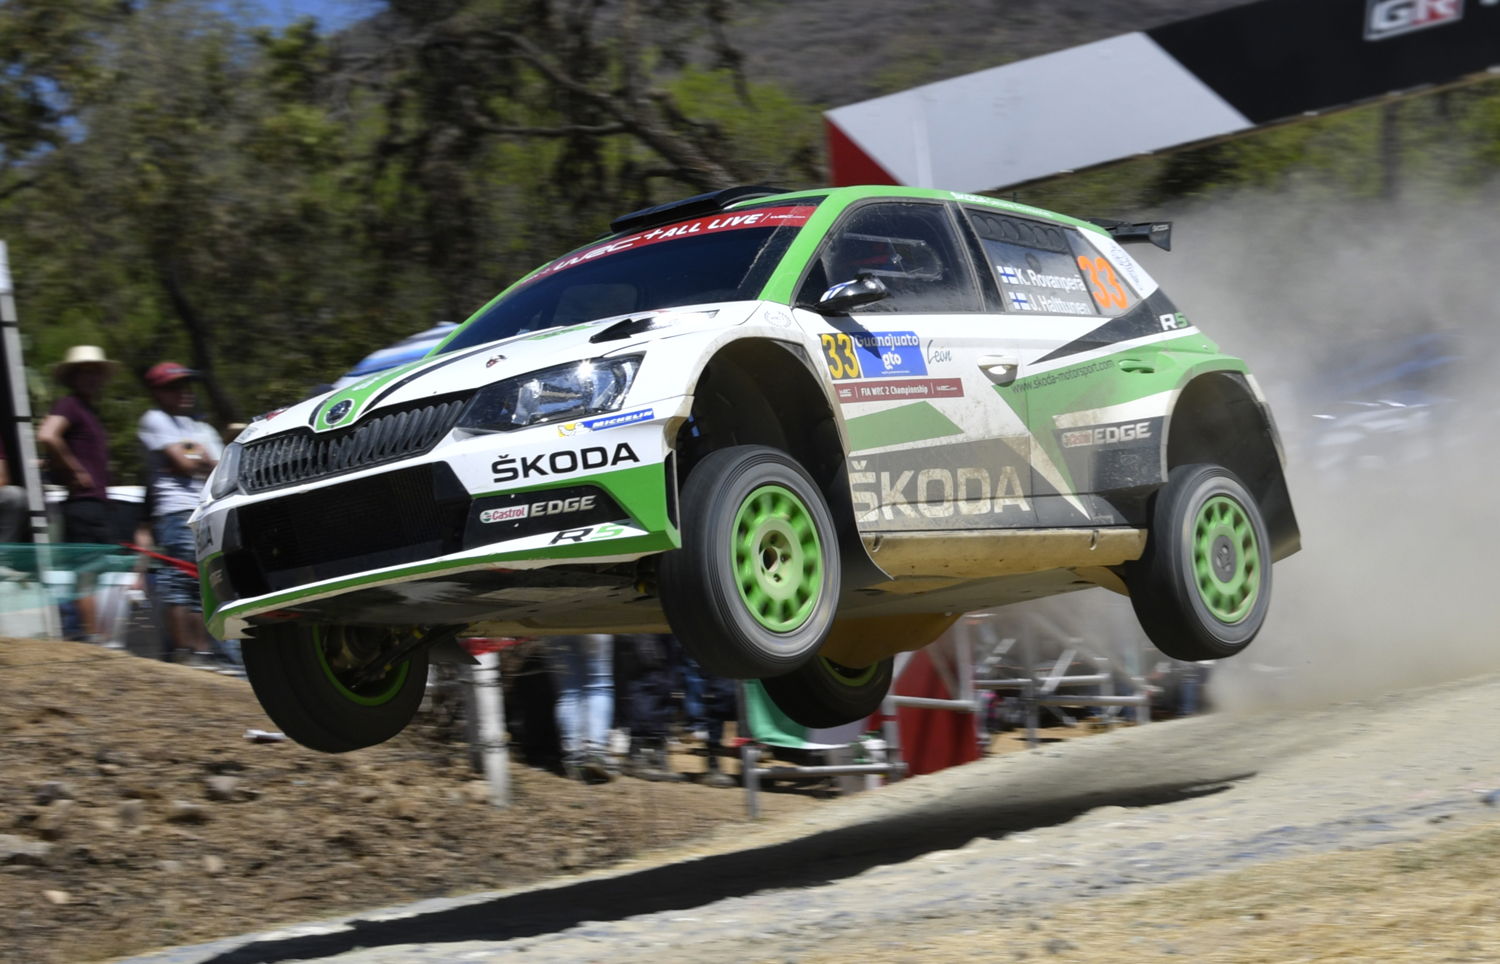 After re-starting, Kalle Rovanperä and co-driver Jonne Halttunen (FIN/FIN) finished 5th of the WRC 2 category at Rally Mexico